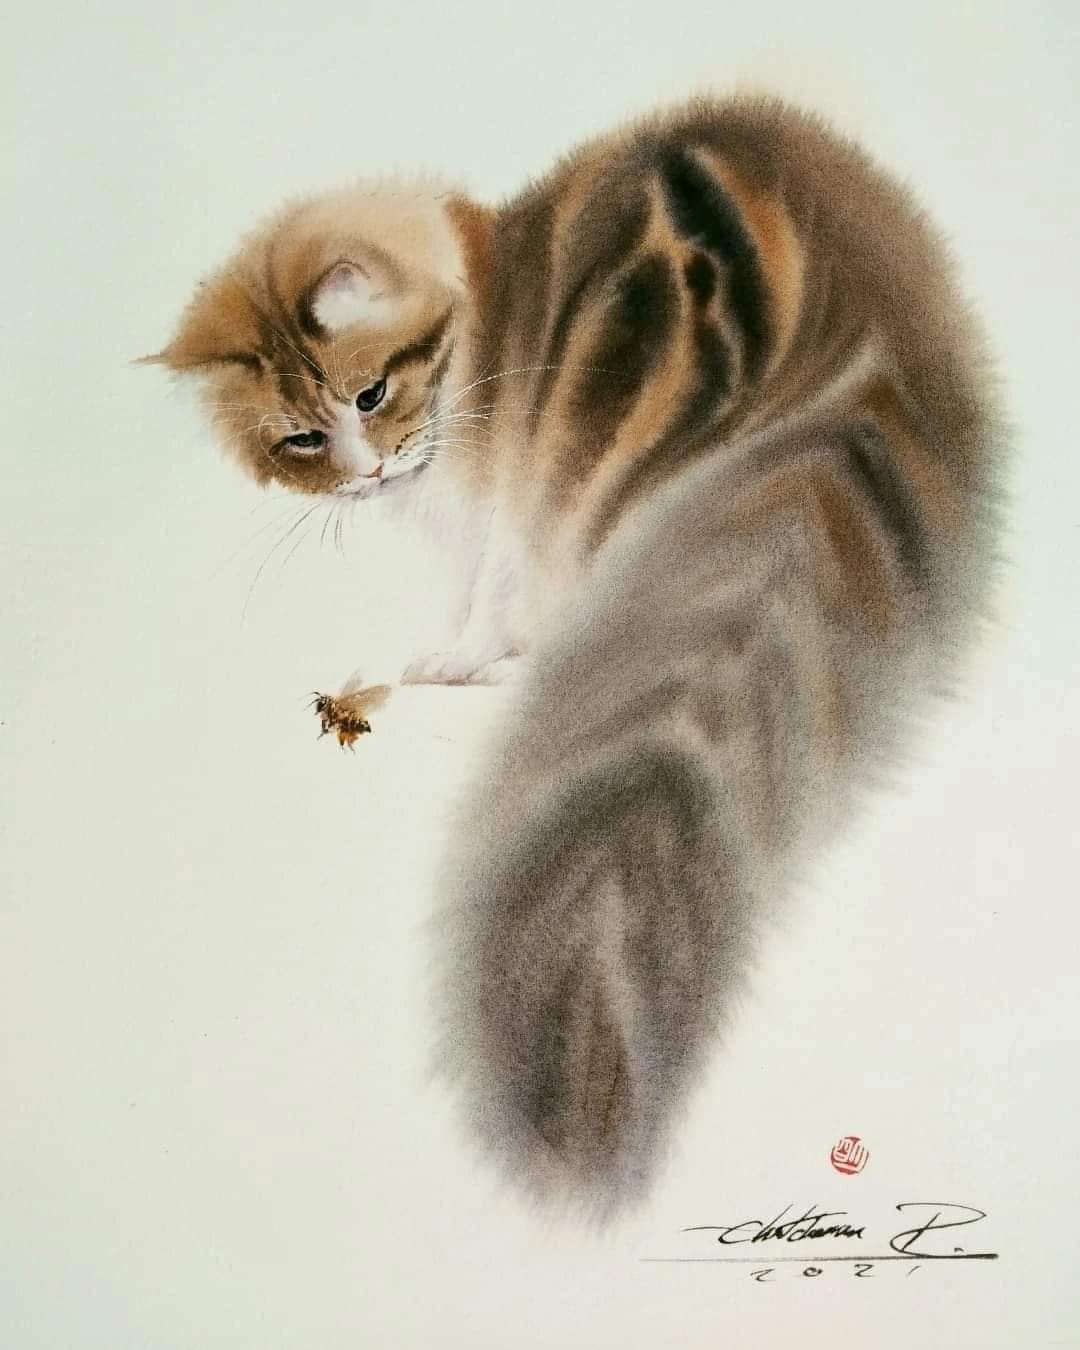 Watercolor miracle cats from an artist from Tailand